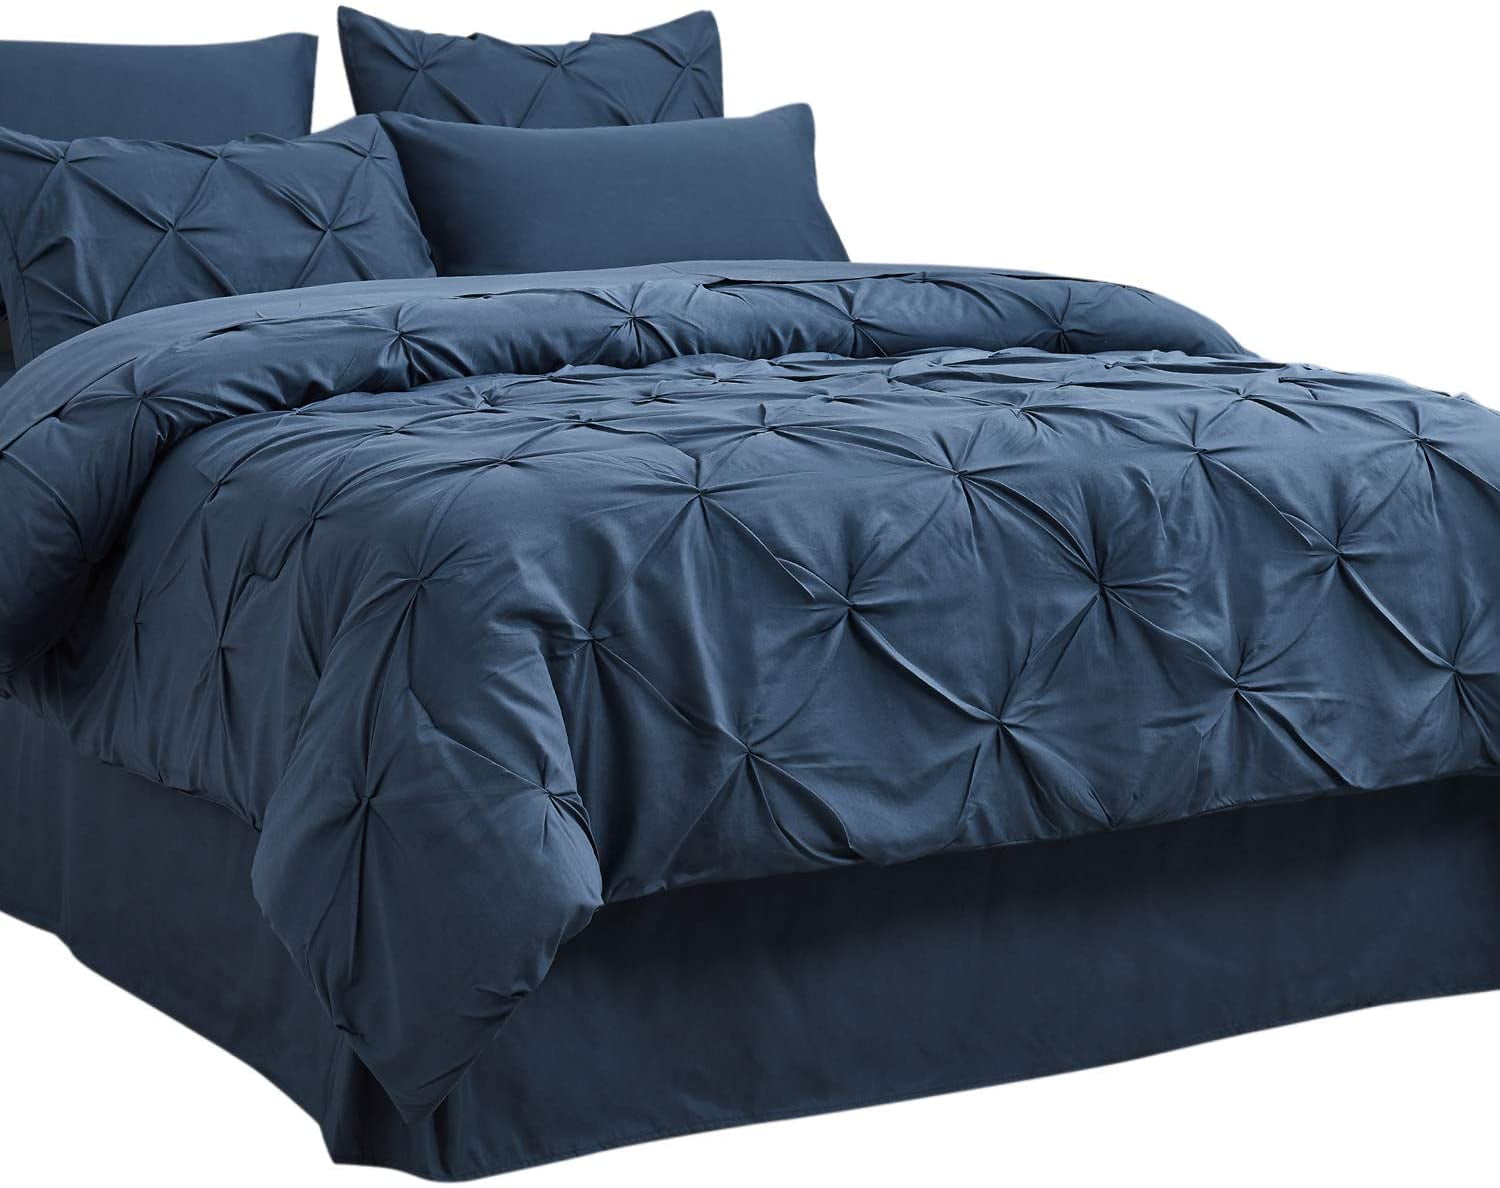 Dark Gray Comforter Set Details about   Wake In Cloud 100% Cotton Fabric with Soft Microfiber 